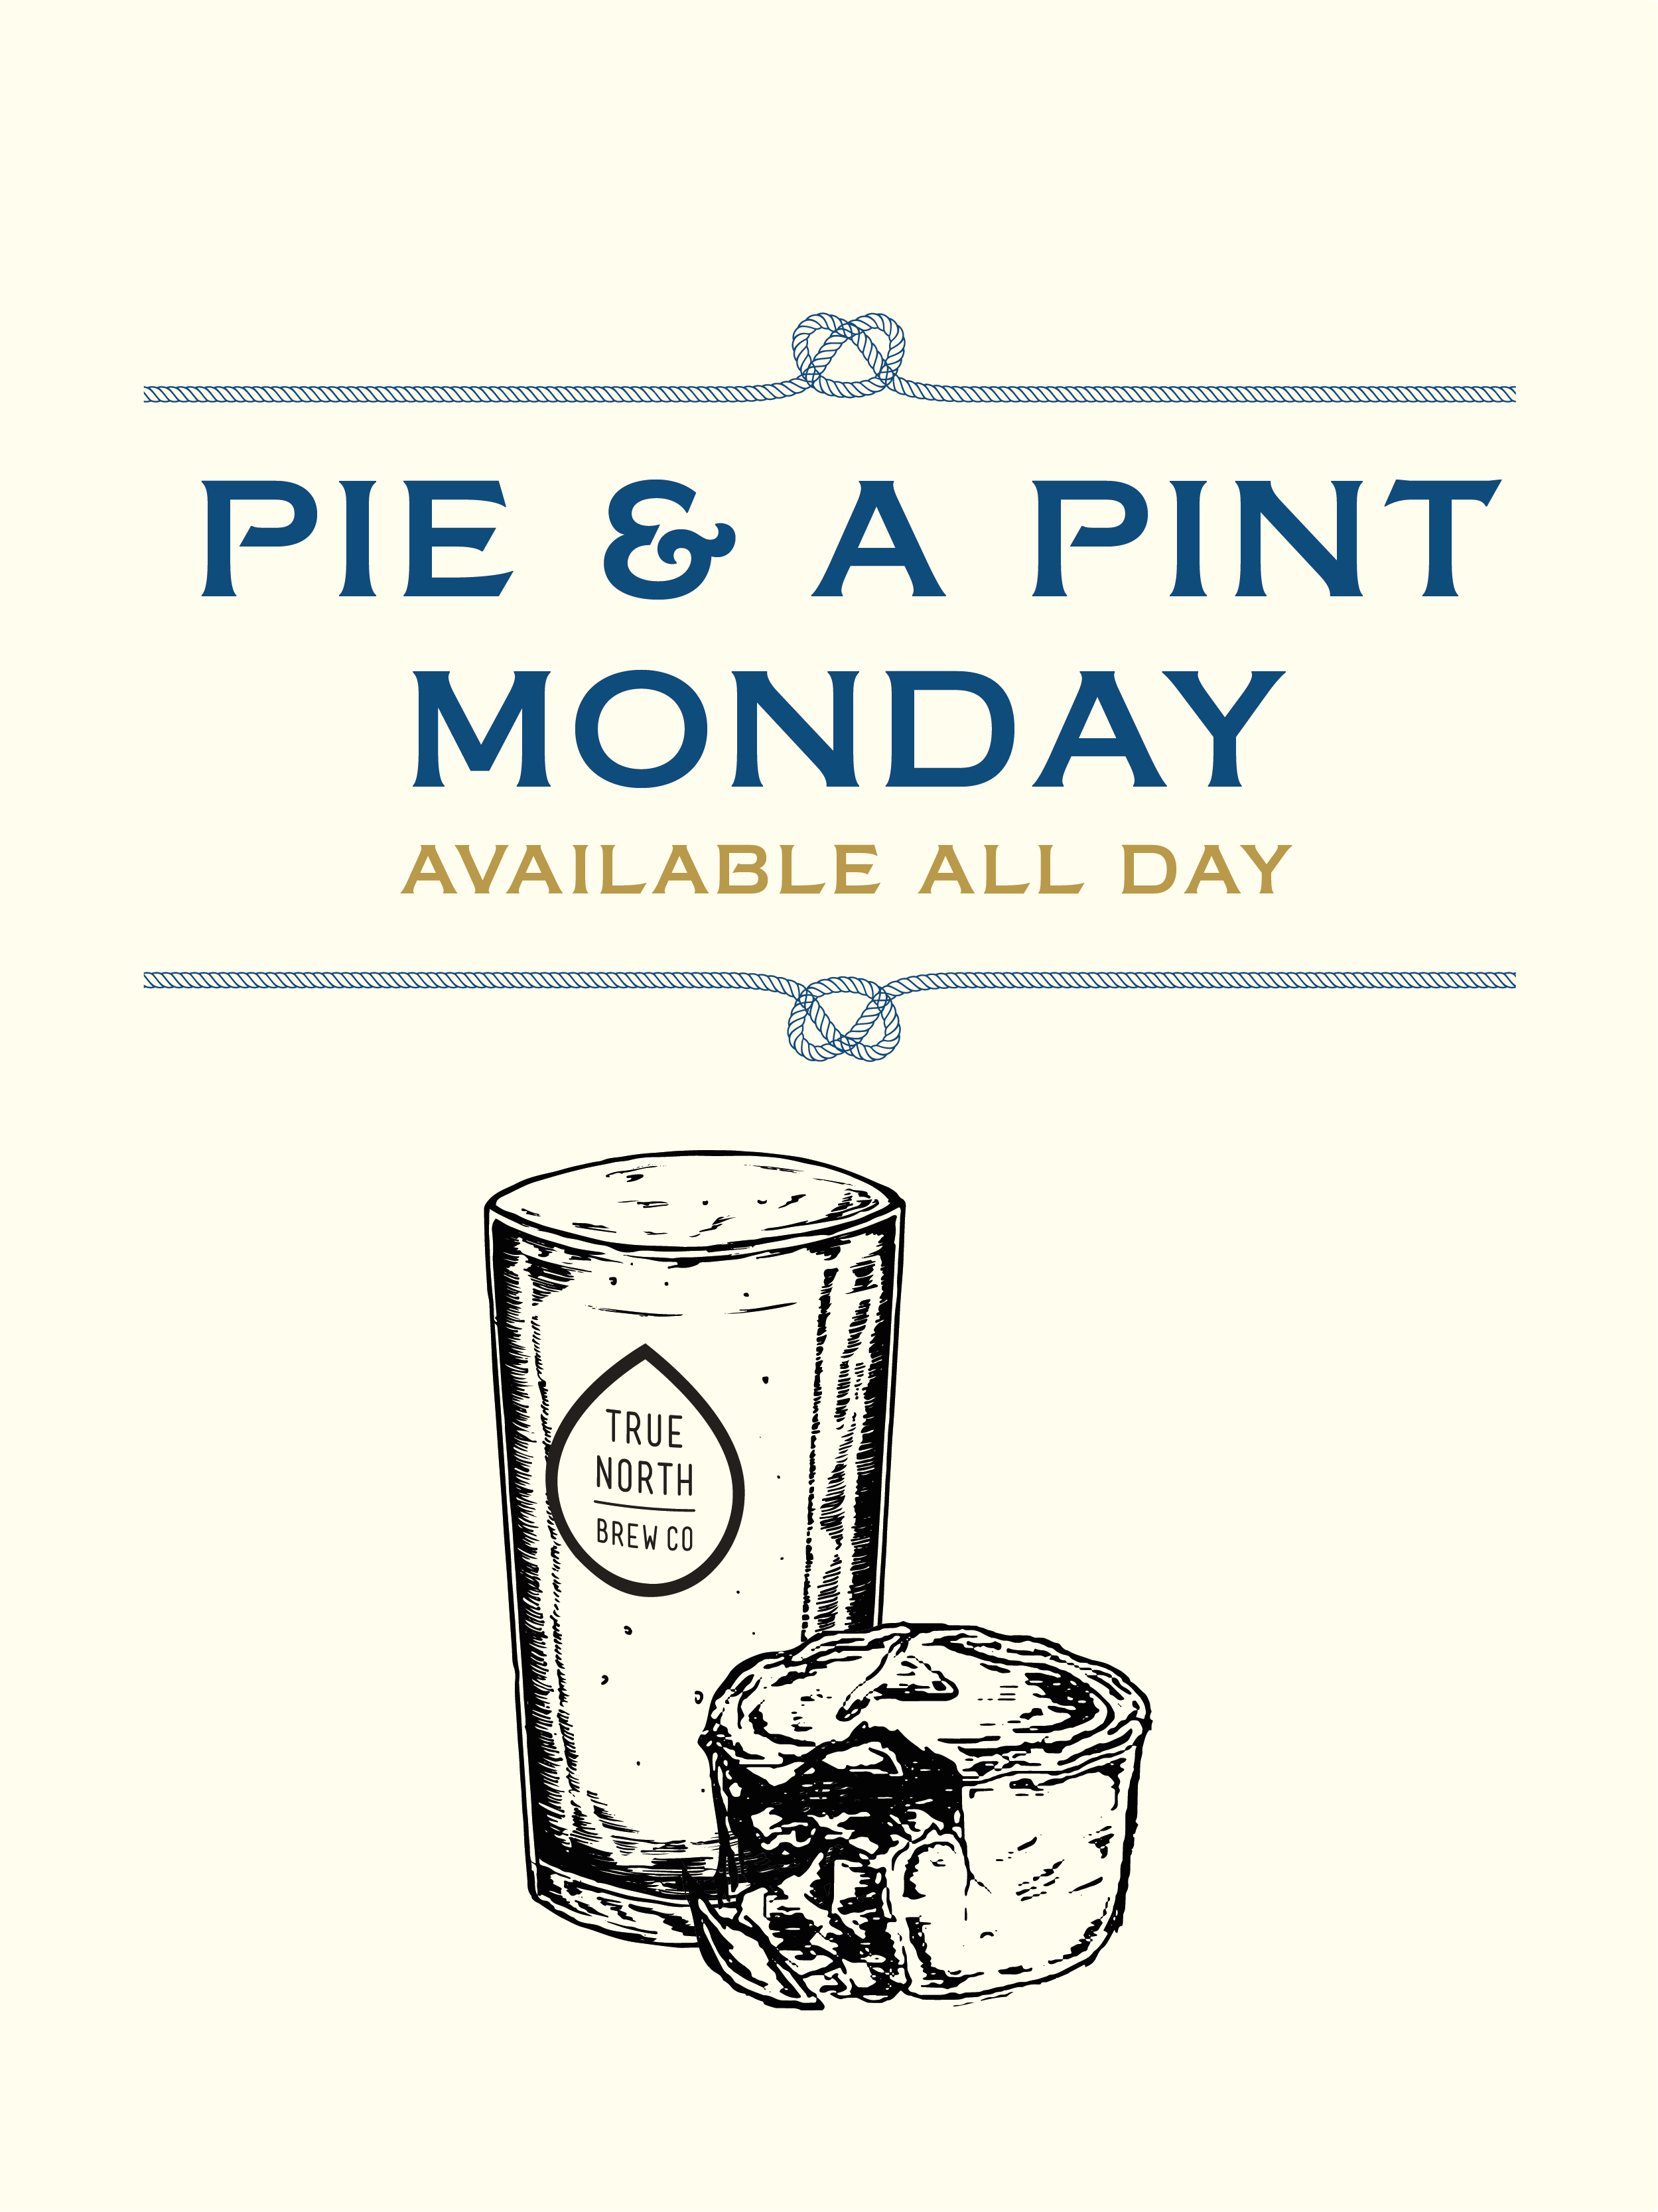 Pie & A Pint Monday at The Crown & Anchor